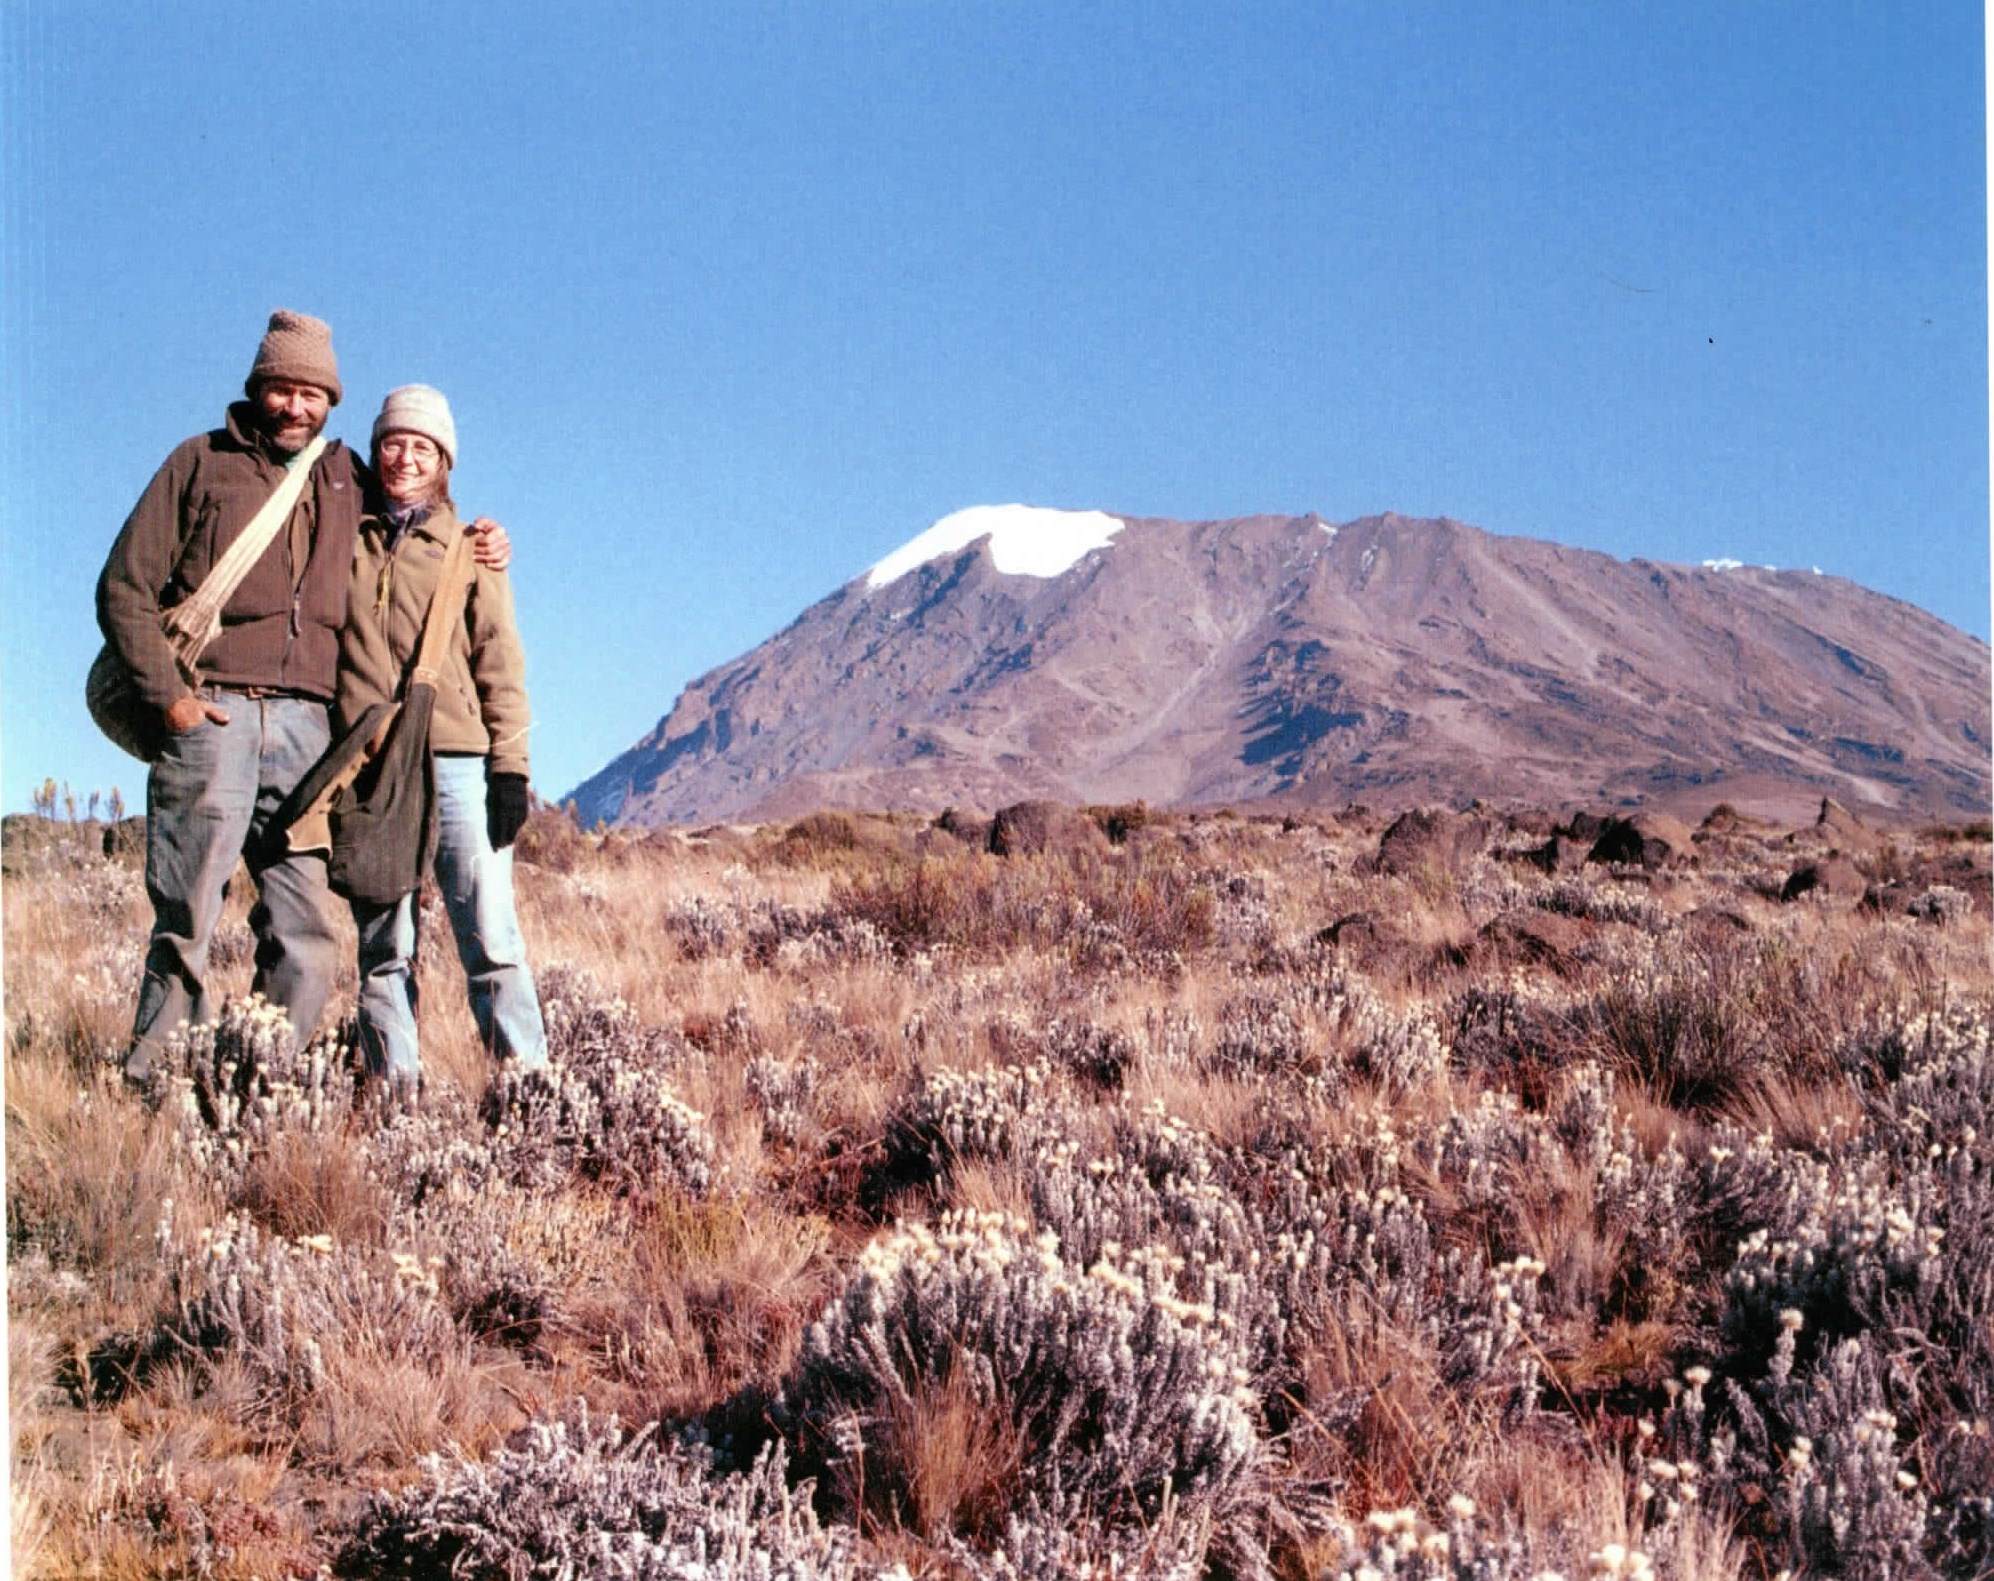 Bill and his best gal, Mary Anne Rogers, during fieldwork on Mt. Kilimanjaro in 2002 (Kibo, one of Kilimanjaro’s peaks, in the background). Courtesy of Mary Anne Rogers.